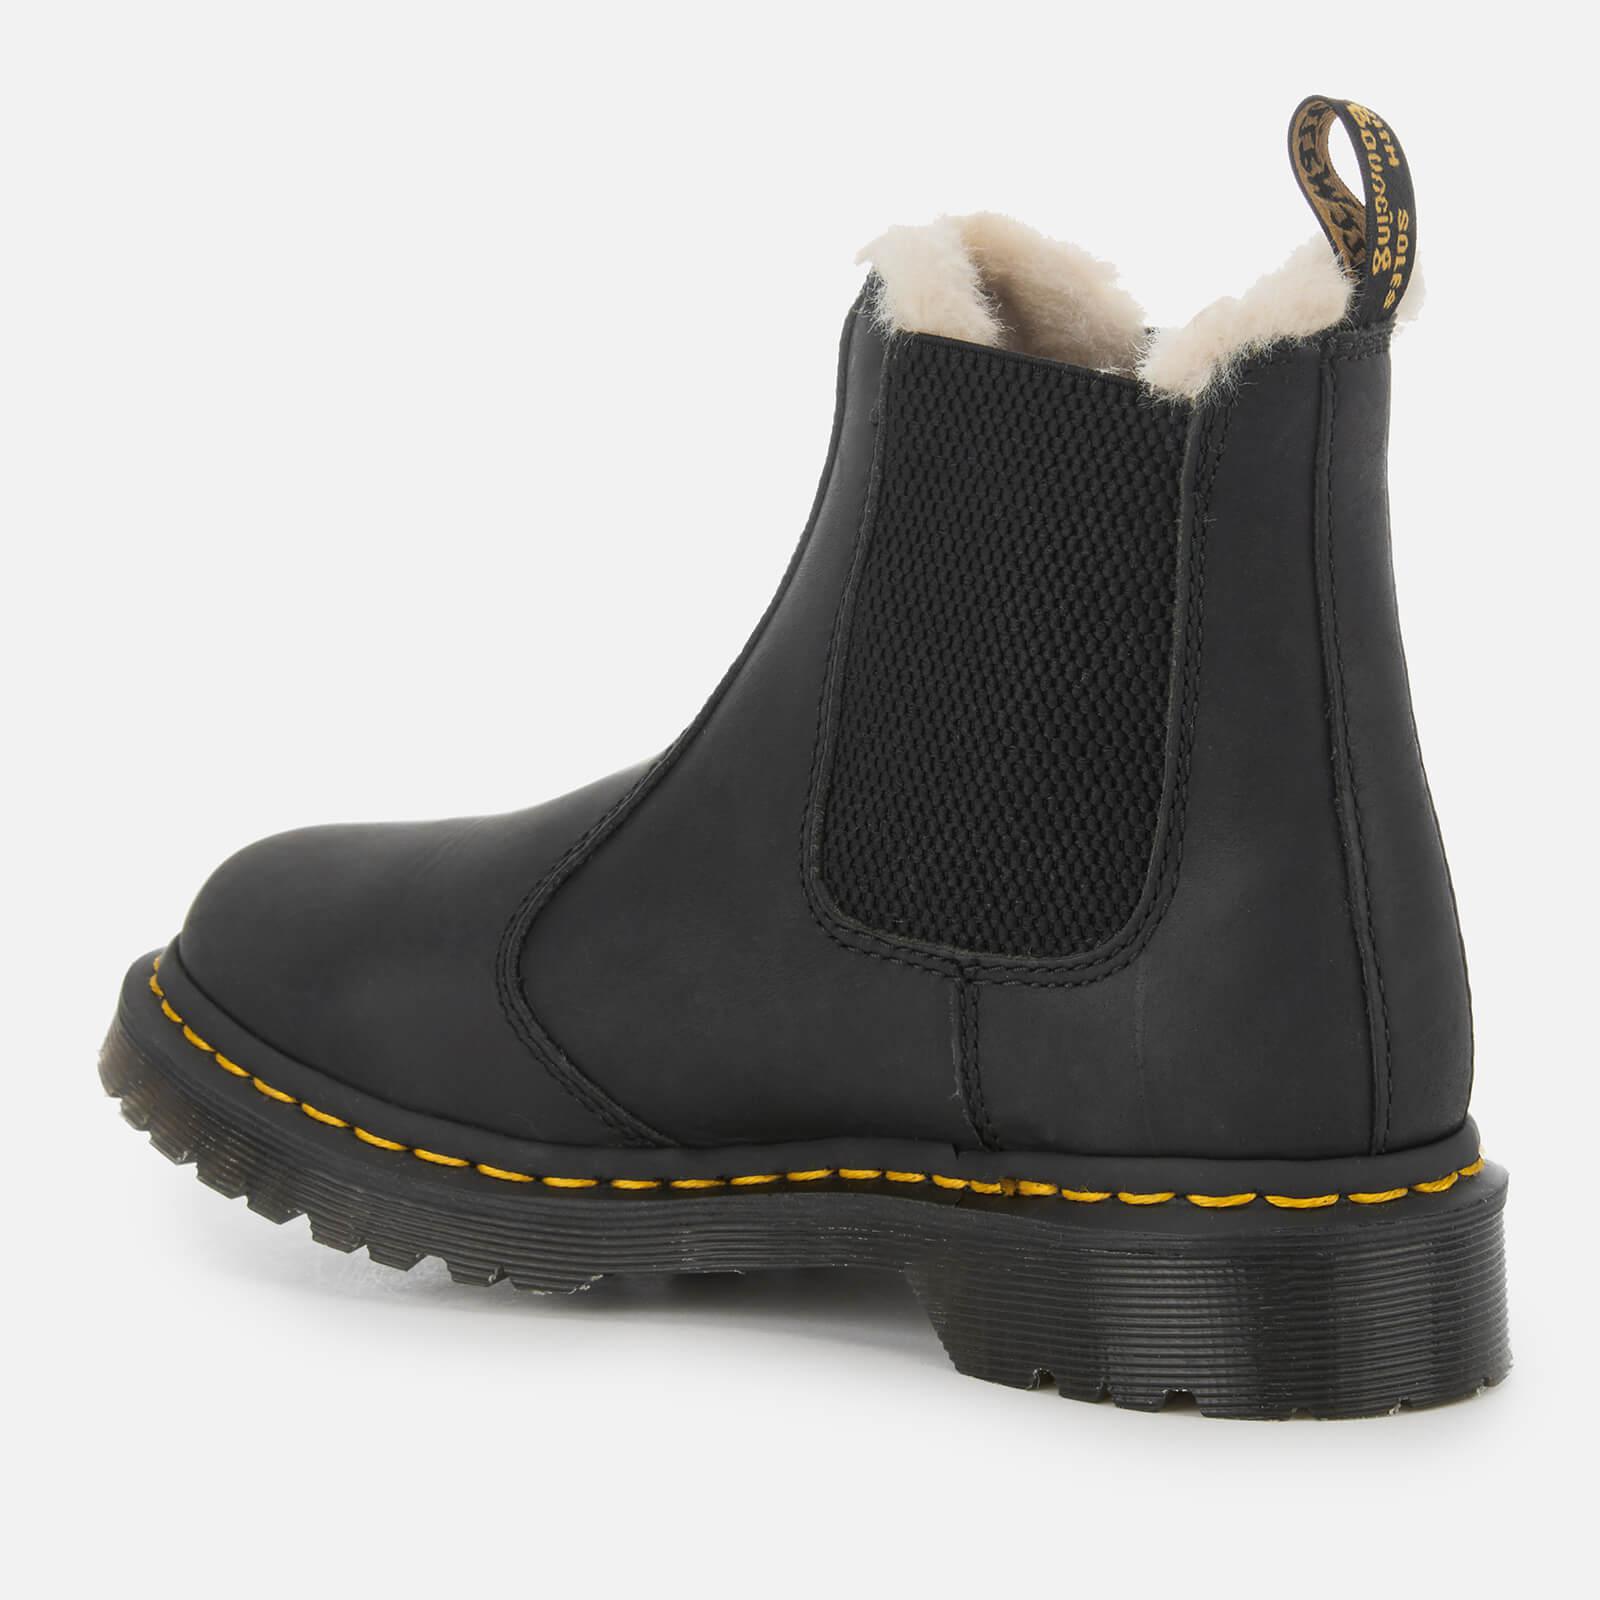 Dr. Martens 2976 Leonore Faux Fur Lined Chelsea Boots in Black - Lyst